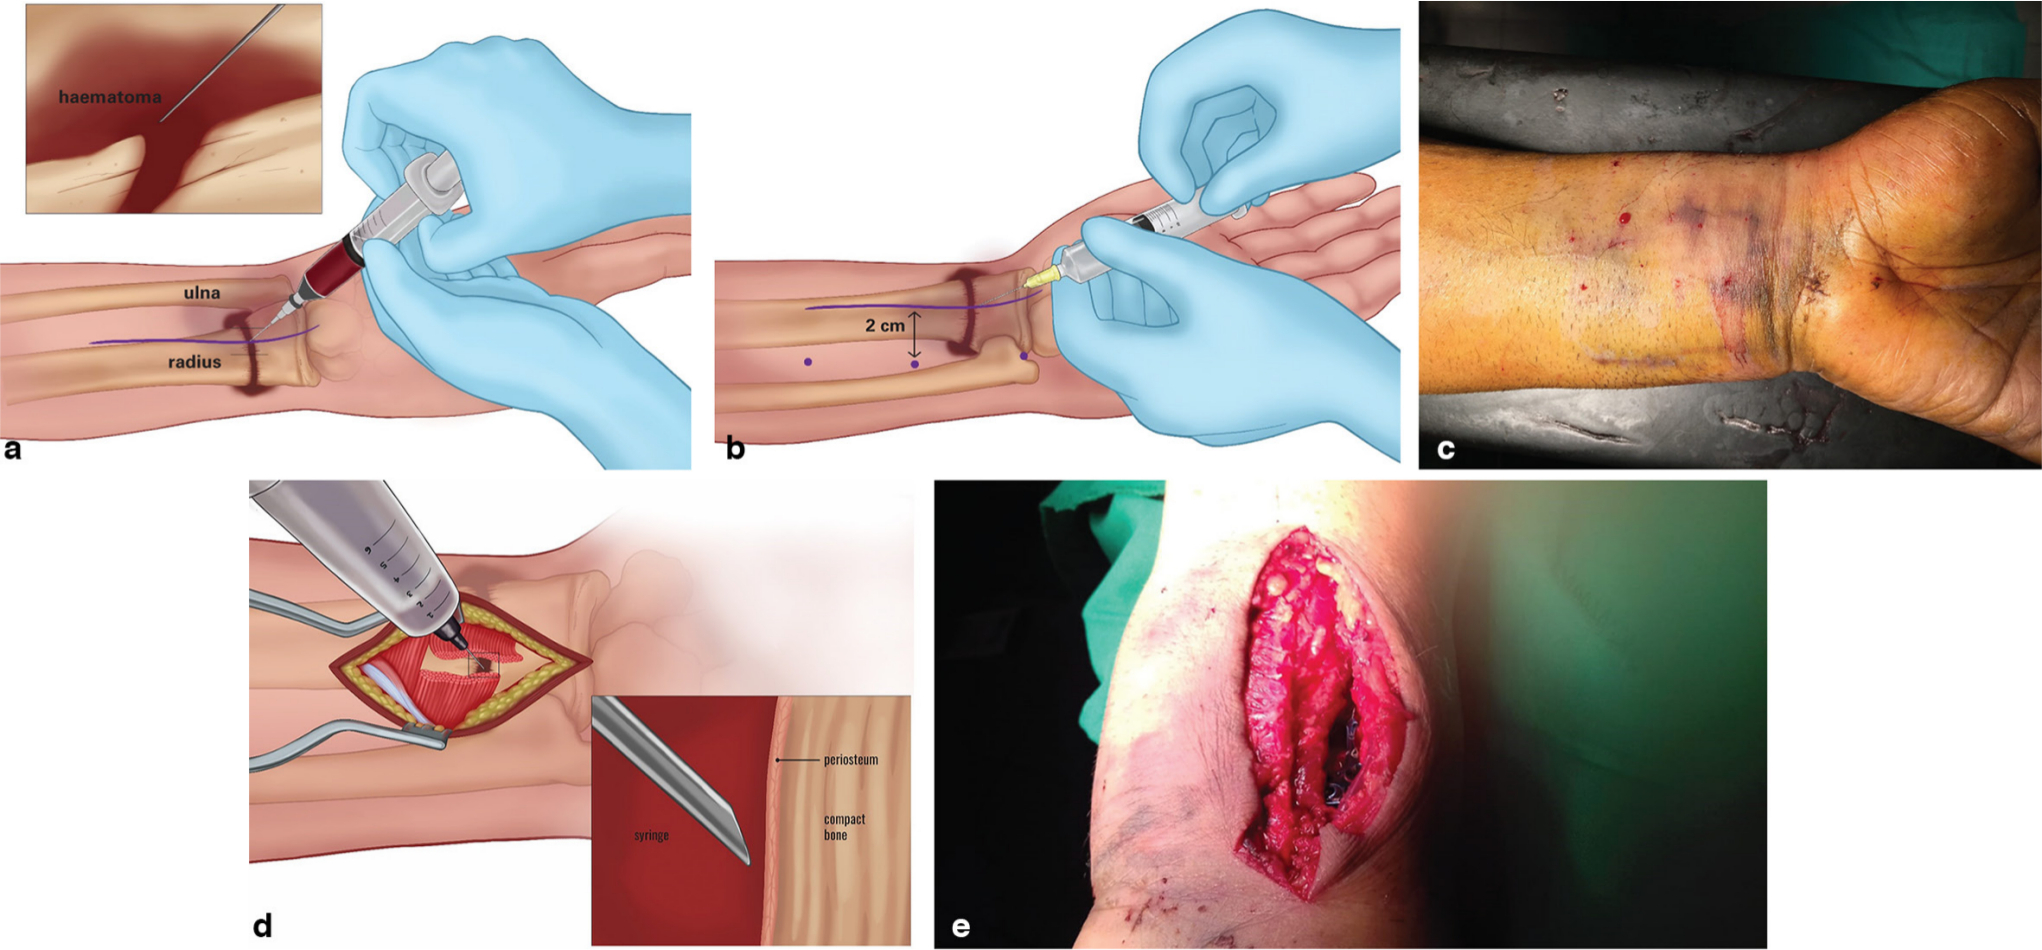 Fig. 3 
            a) Haematoma block (2% lidocaine). b) Skin infiltration (subcutaneous plane) with wide-awake local anaesthesia with no tourniquet (WALANT) solution. c) Tumescent effect of WALANT solution. d) Periosteal block. e) Final implant position and surgical exposure.
          